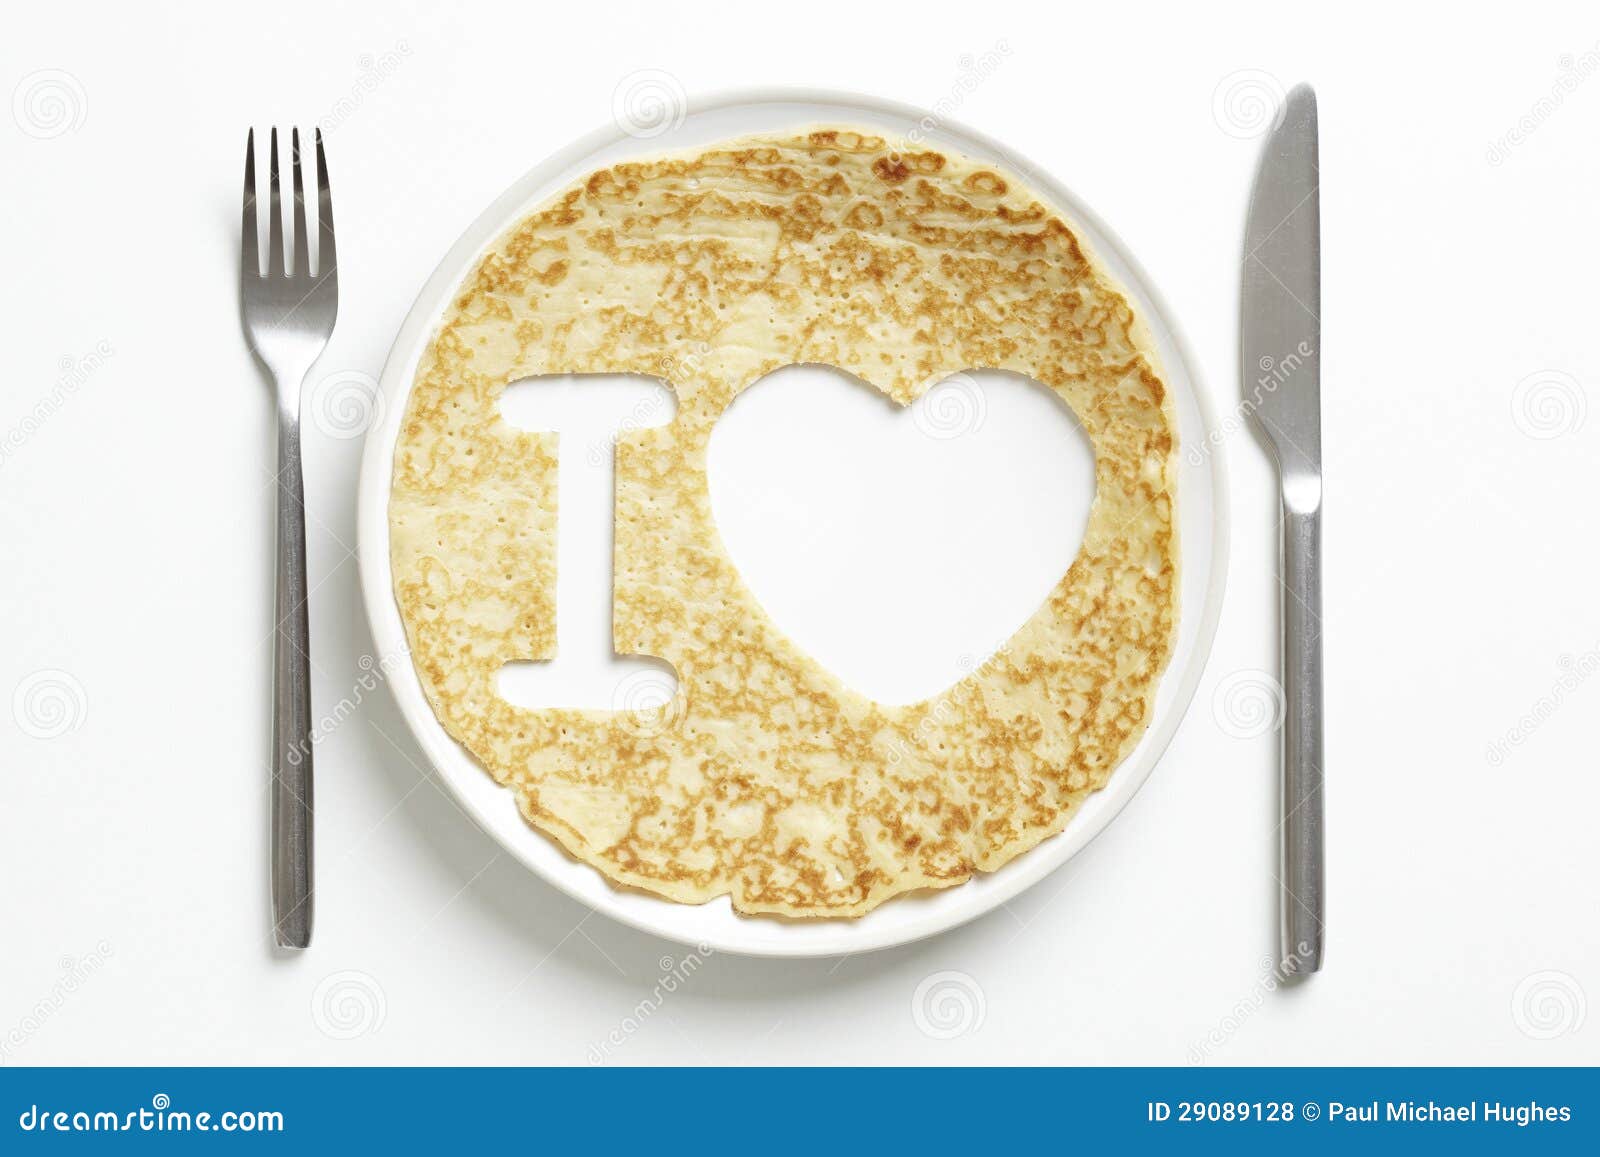 Pancake with Love Heart Shape Cut Out Stock Photo - Image of food ...